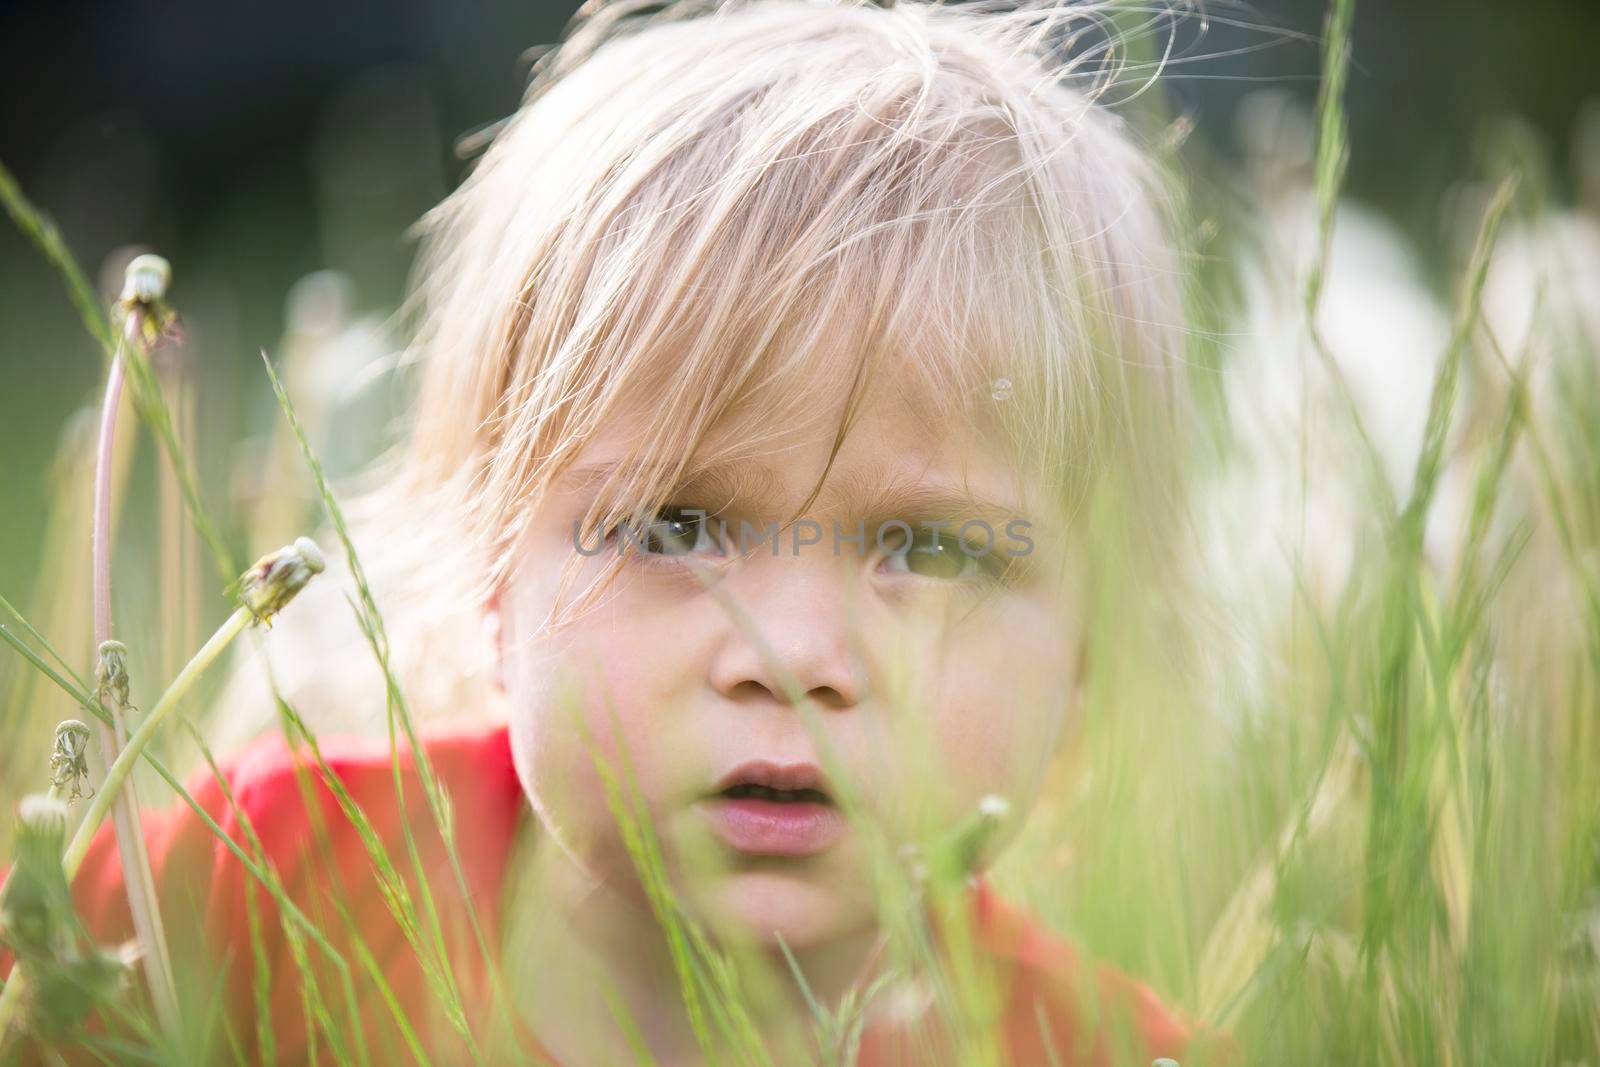 The face of a child in the green grass. Portrait of a kid in nature